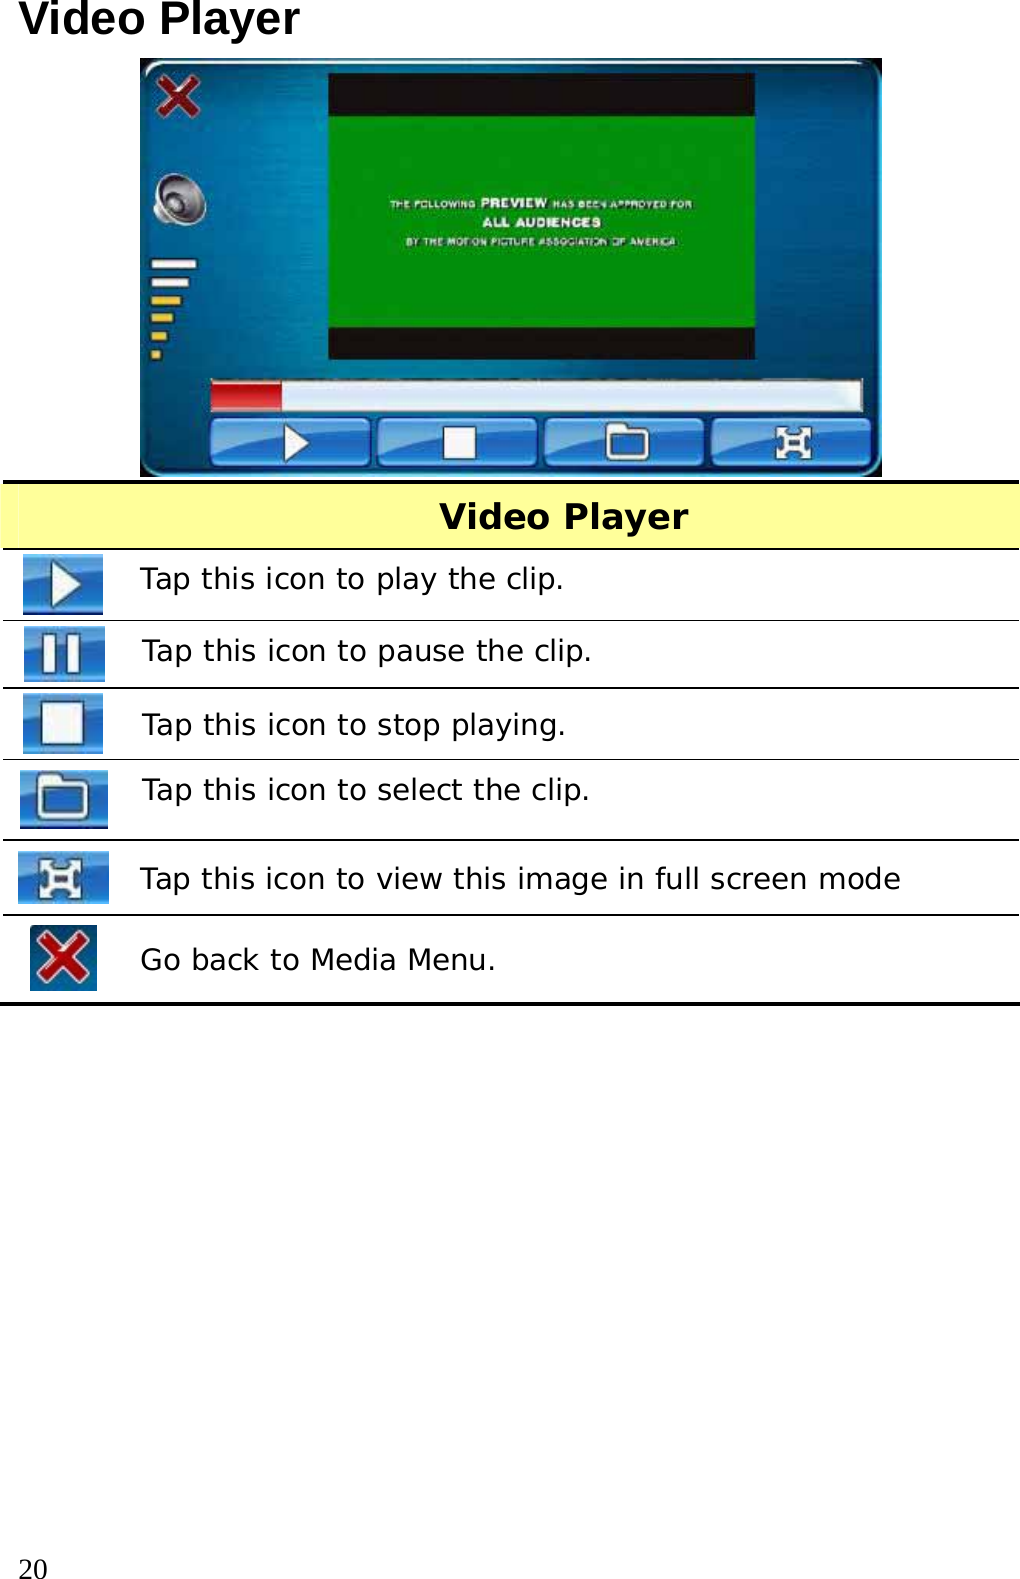  20 Video Player  Video Player     Tap this icon to play the clip.  Tap this icon to pause the clip.  Tap this icon to stop playing.  Tap this icon to select the clip.  Tap this icon to view this image in full screen mode  Go back to Media Menu.     